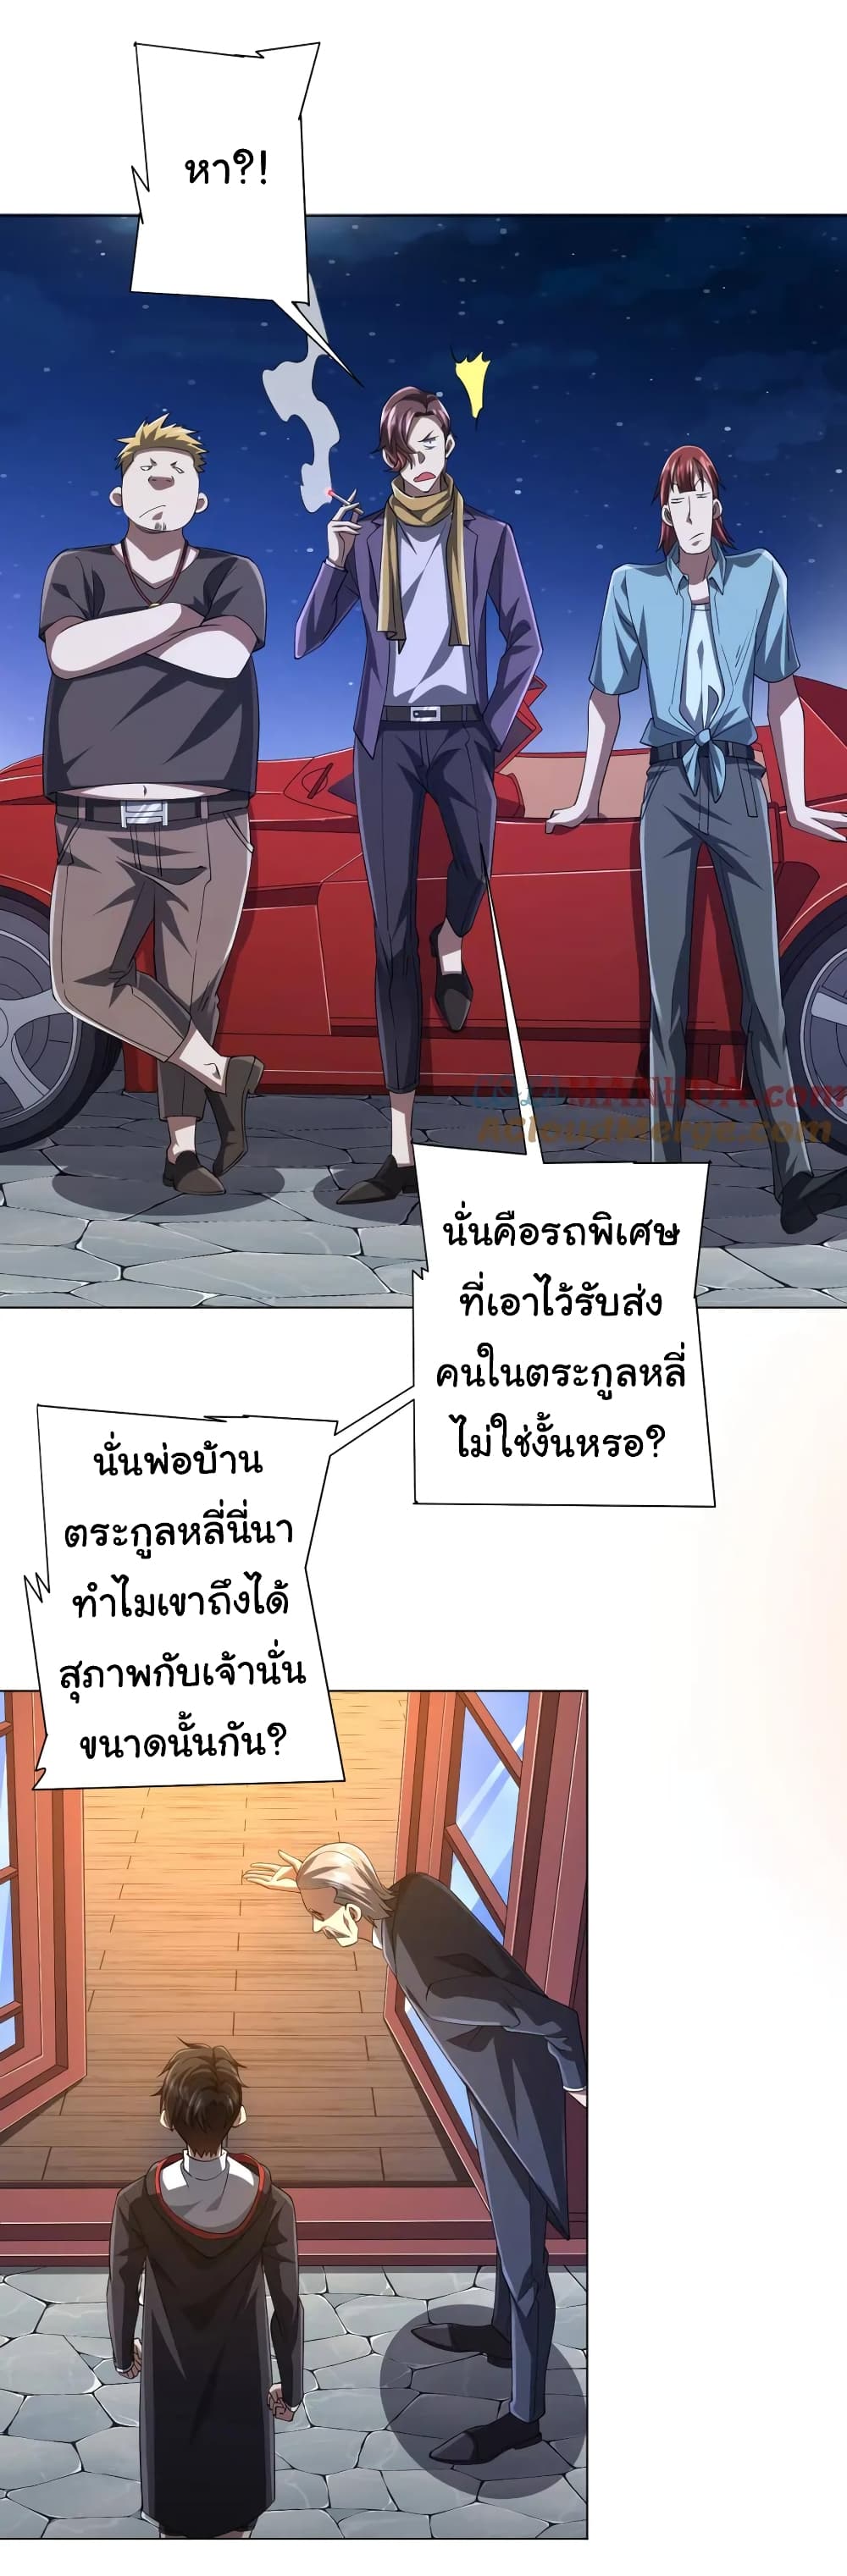 Start with Trillions of Coins ตอนที่ 56 (4)